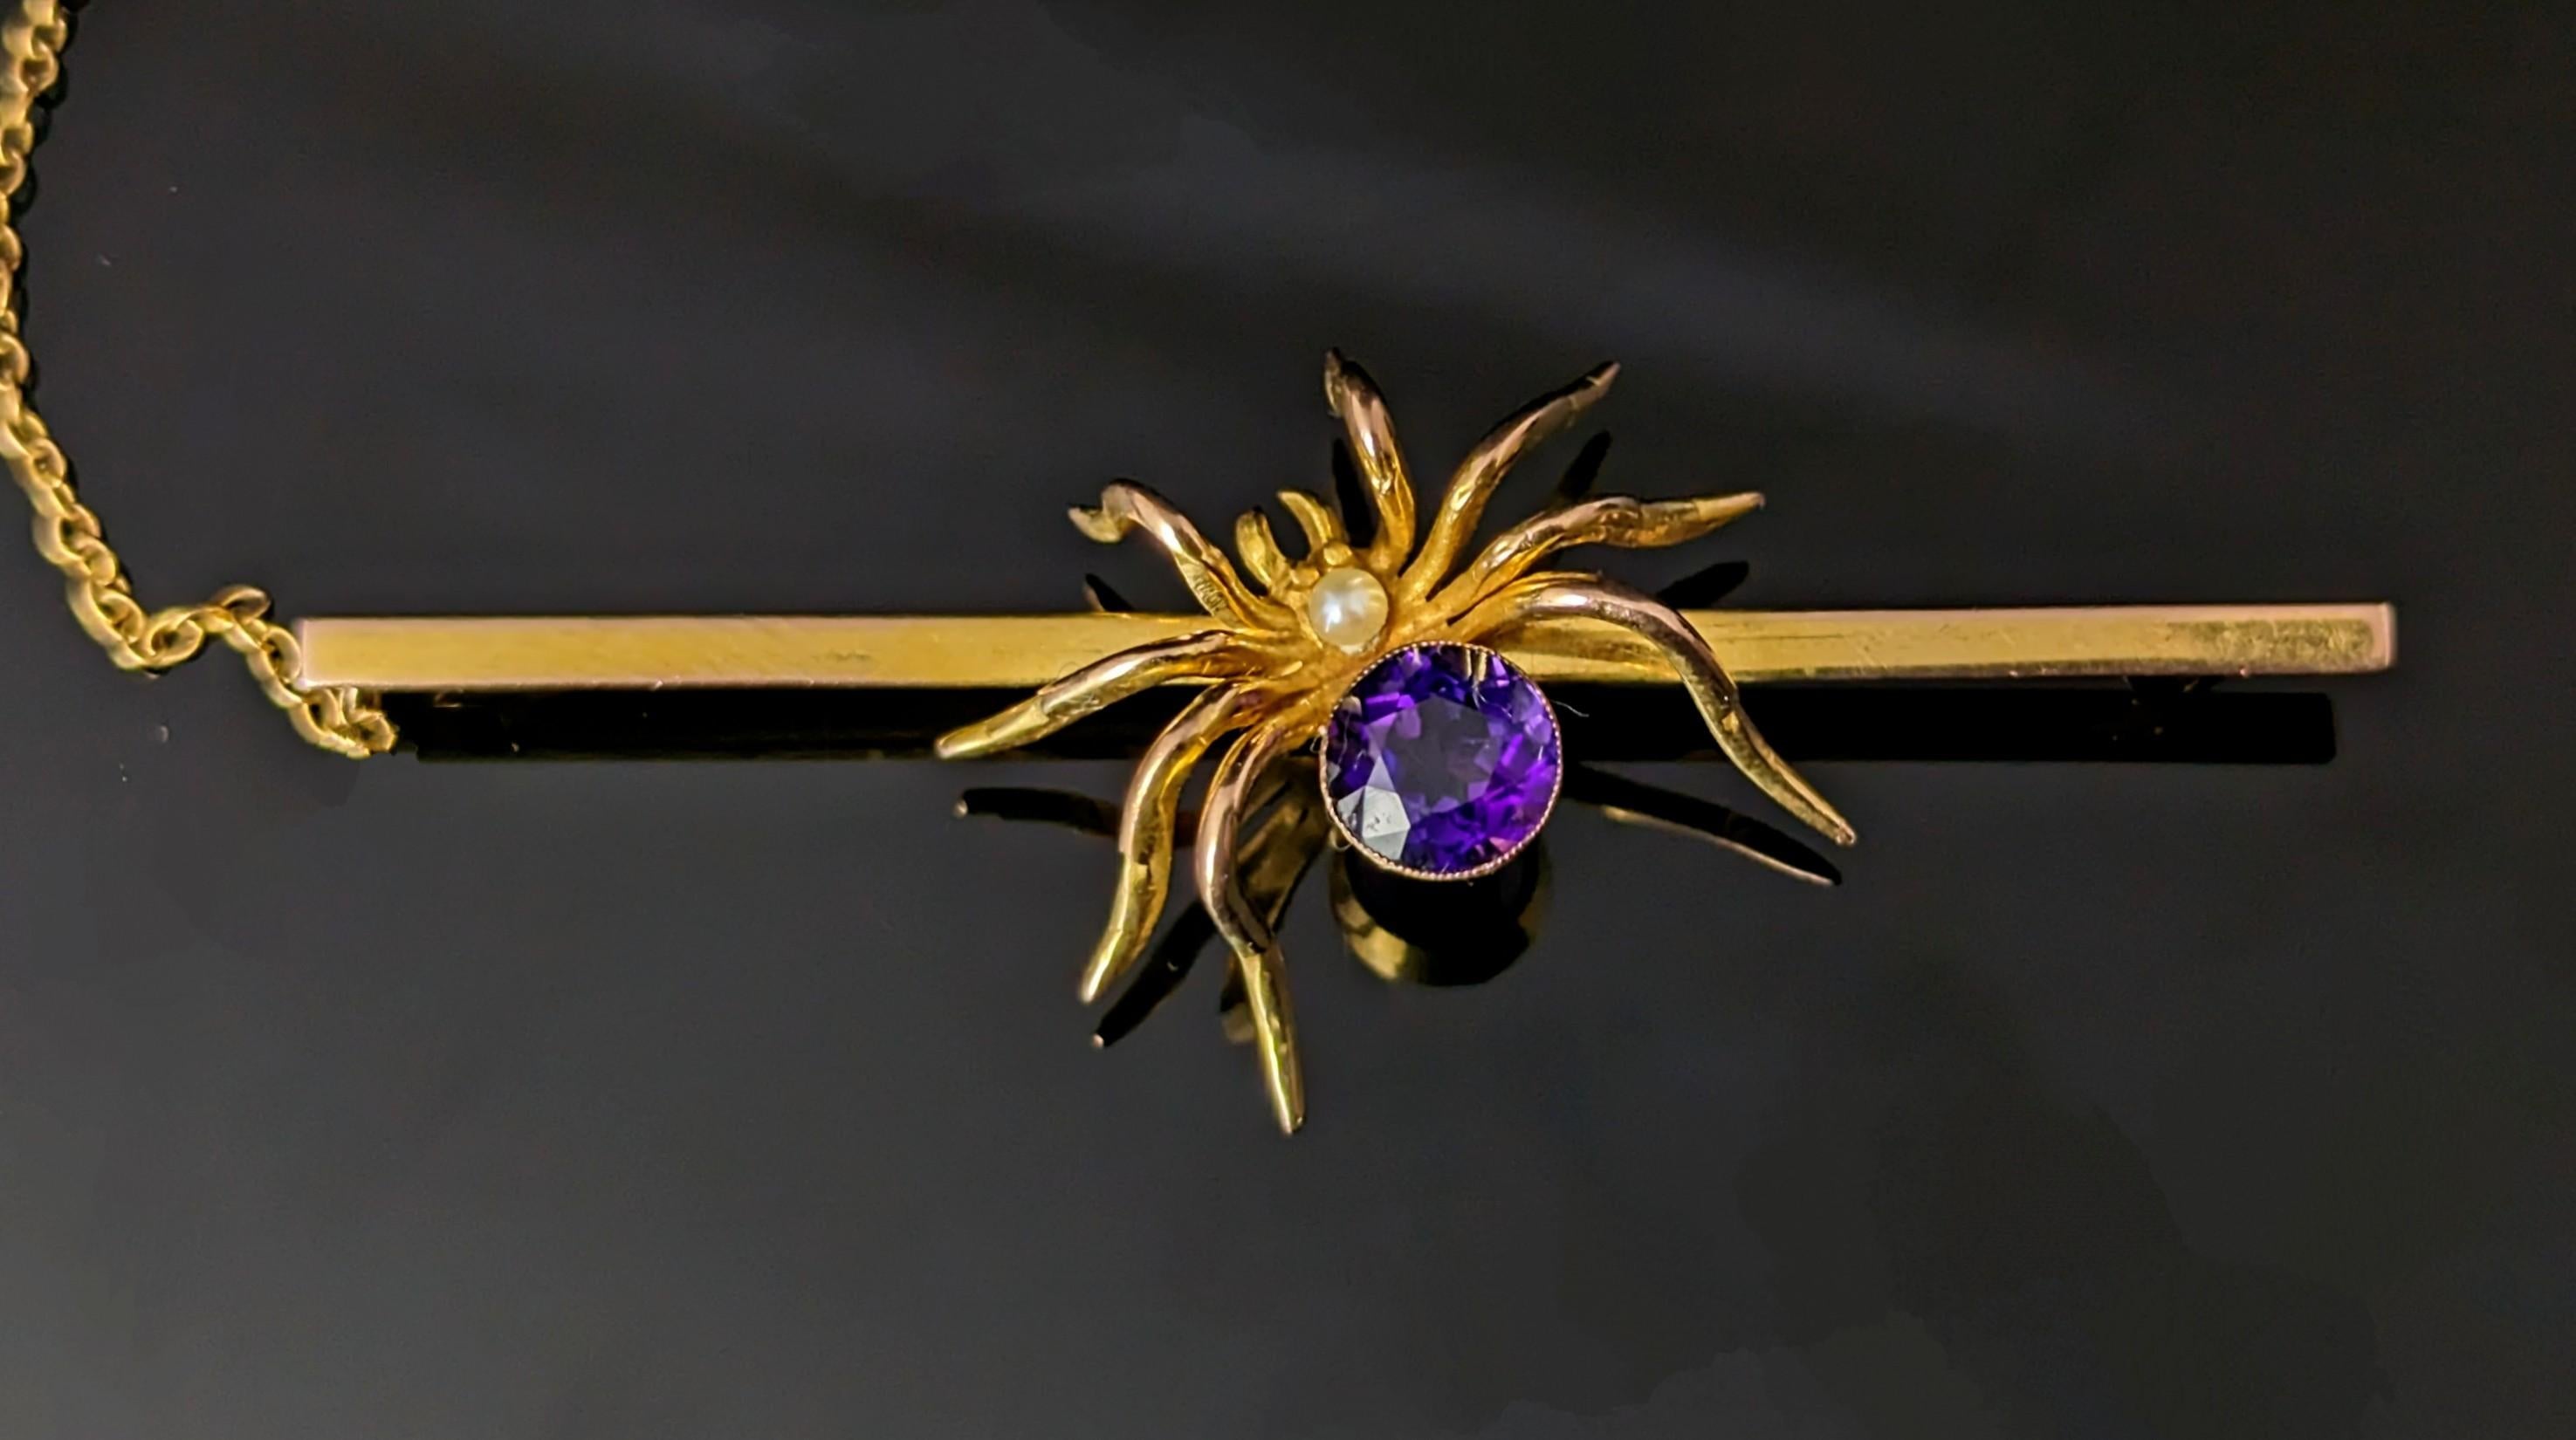 There are spider brooches and then there are SPIDER brooches, this beauty is definitely in the latter category.

This is a very fine and handsome example, a large 9ct gold bar brooch mounted with a substantial sized gold spider.

The spiders body is